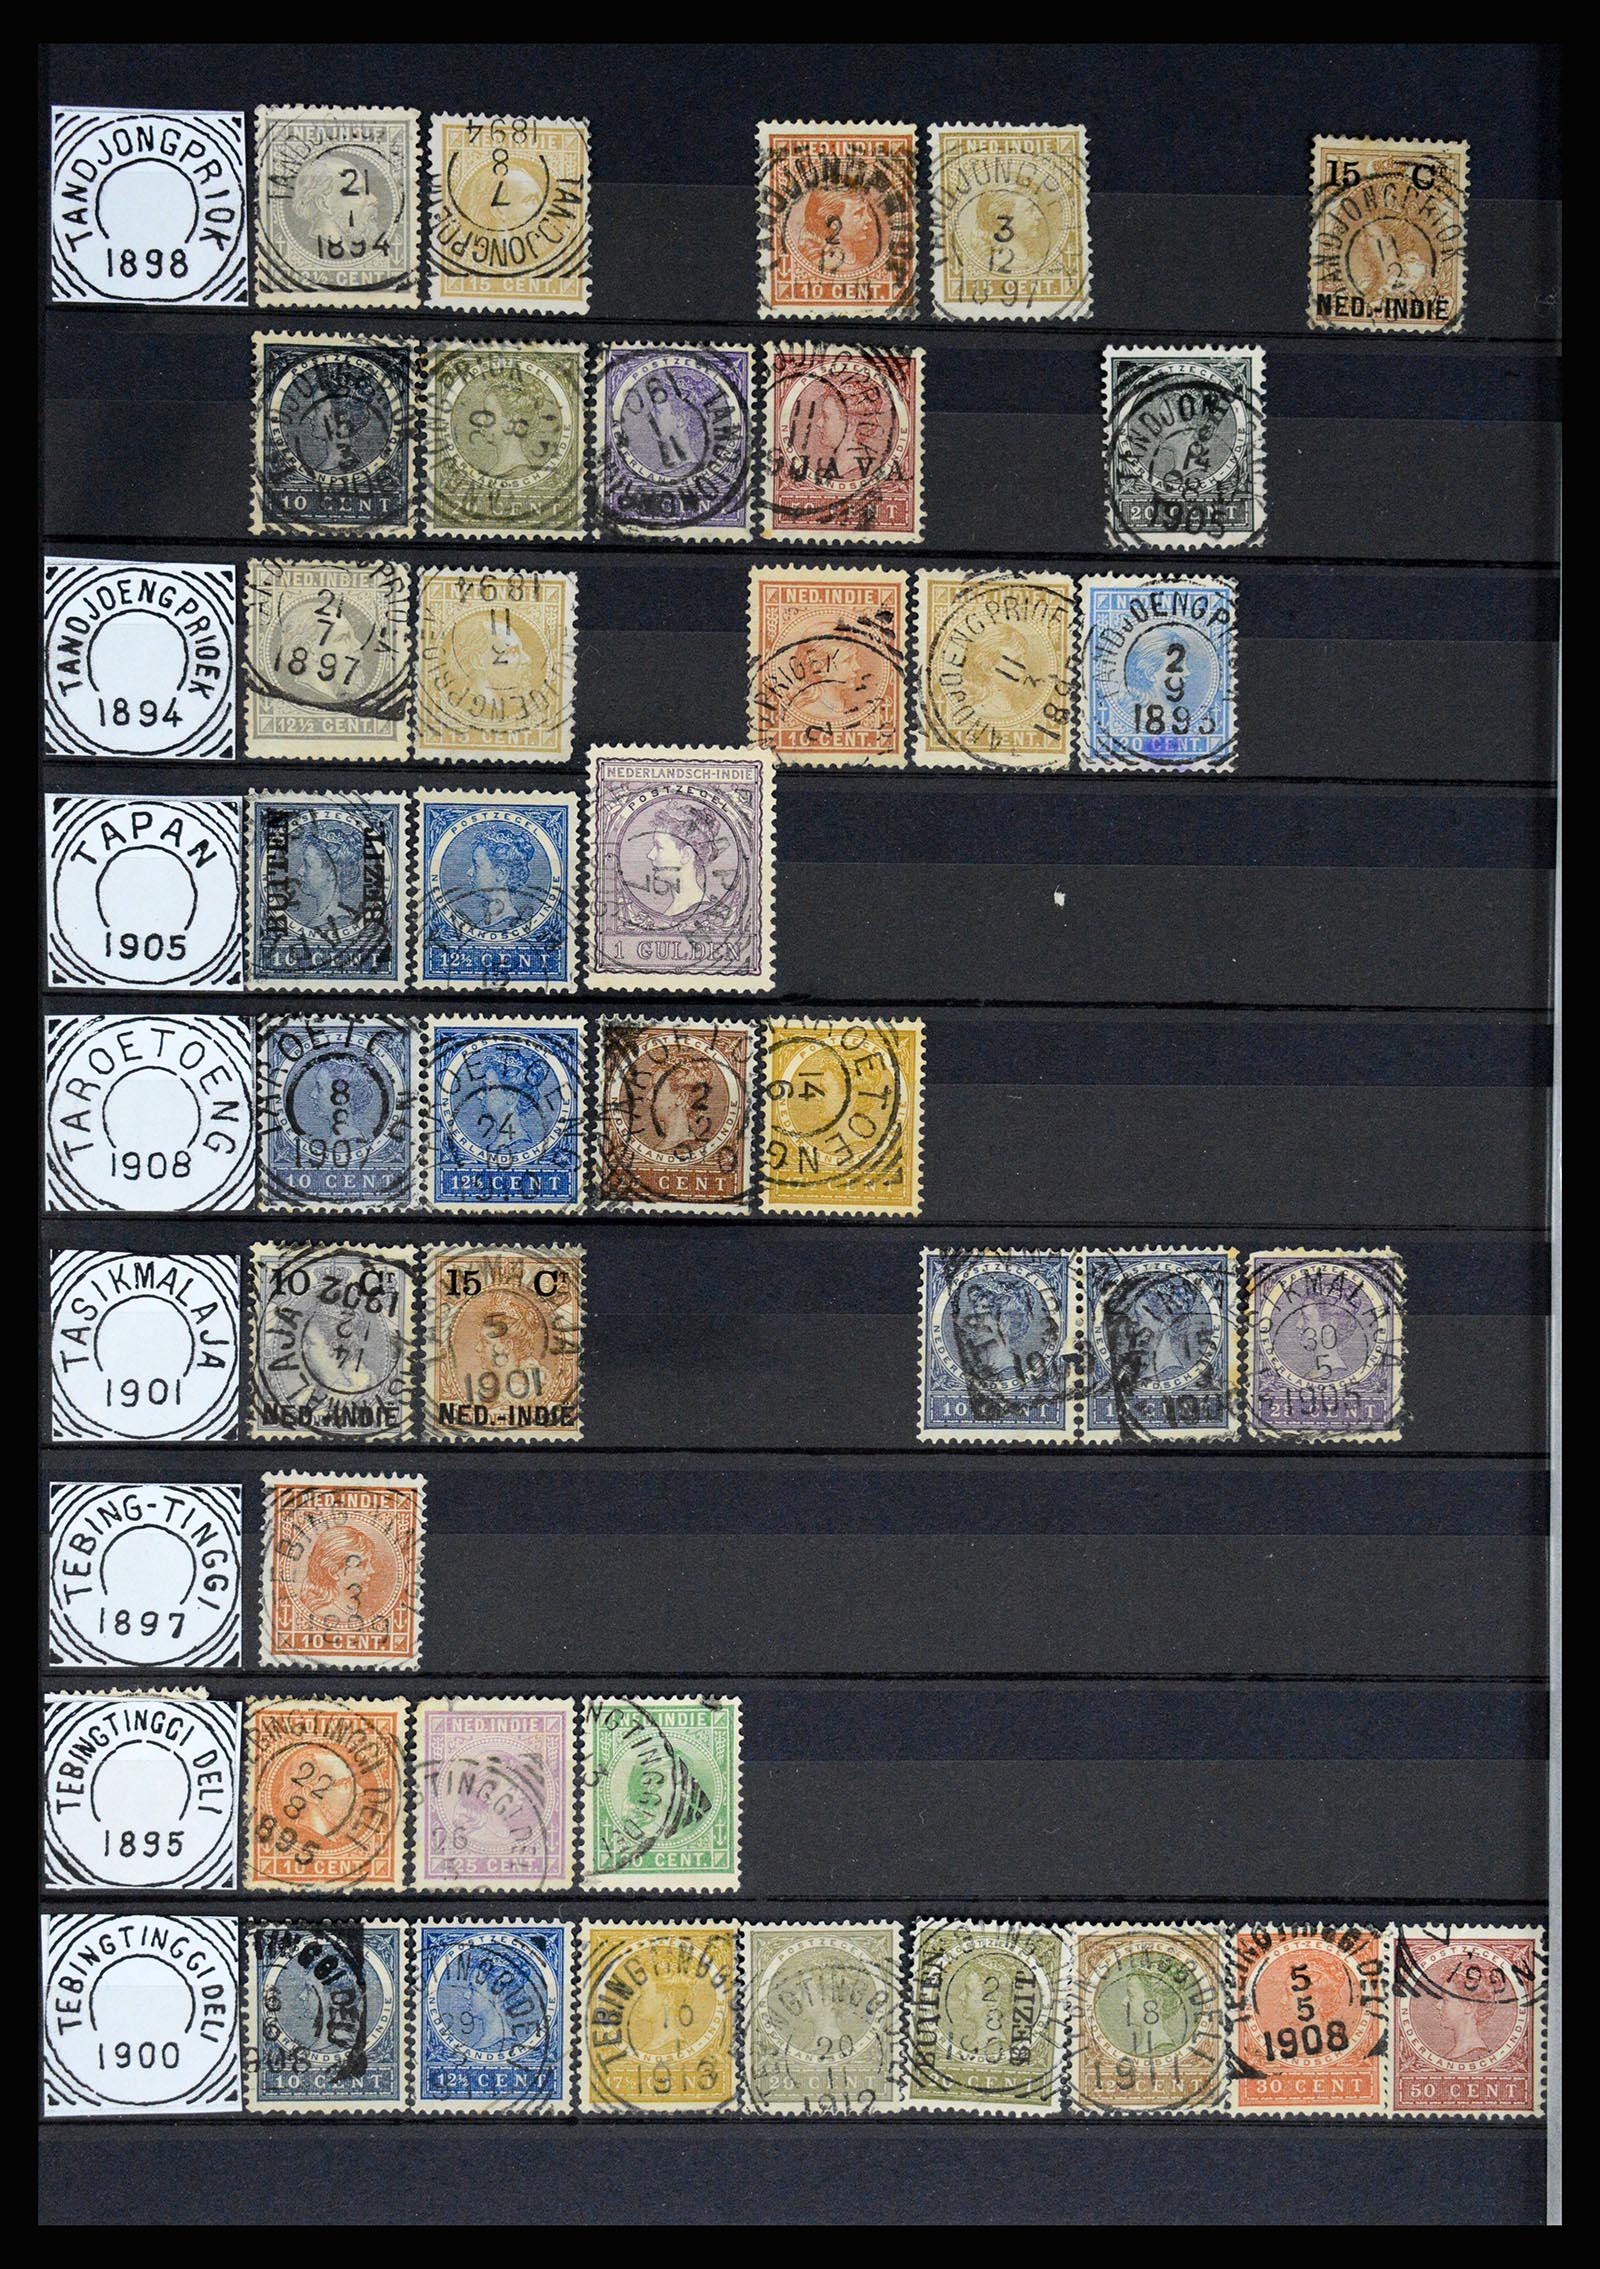 36839 053 - Stamp collection 36839 Dutch east Indies square cancels.